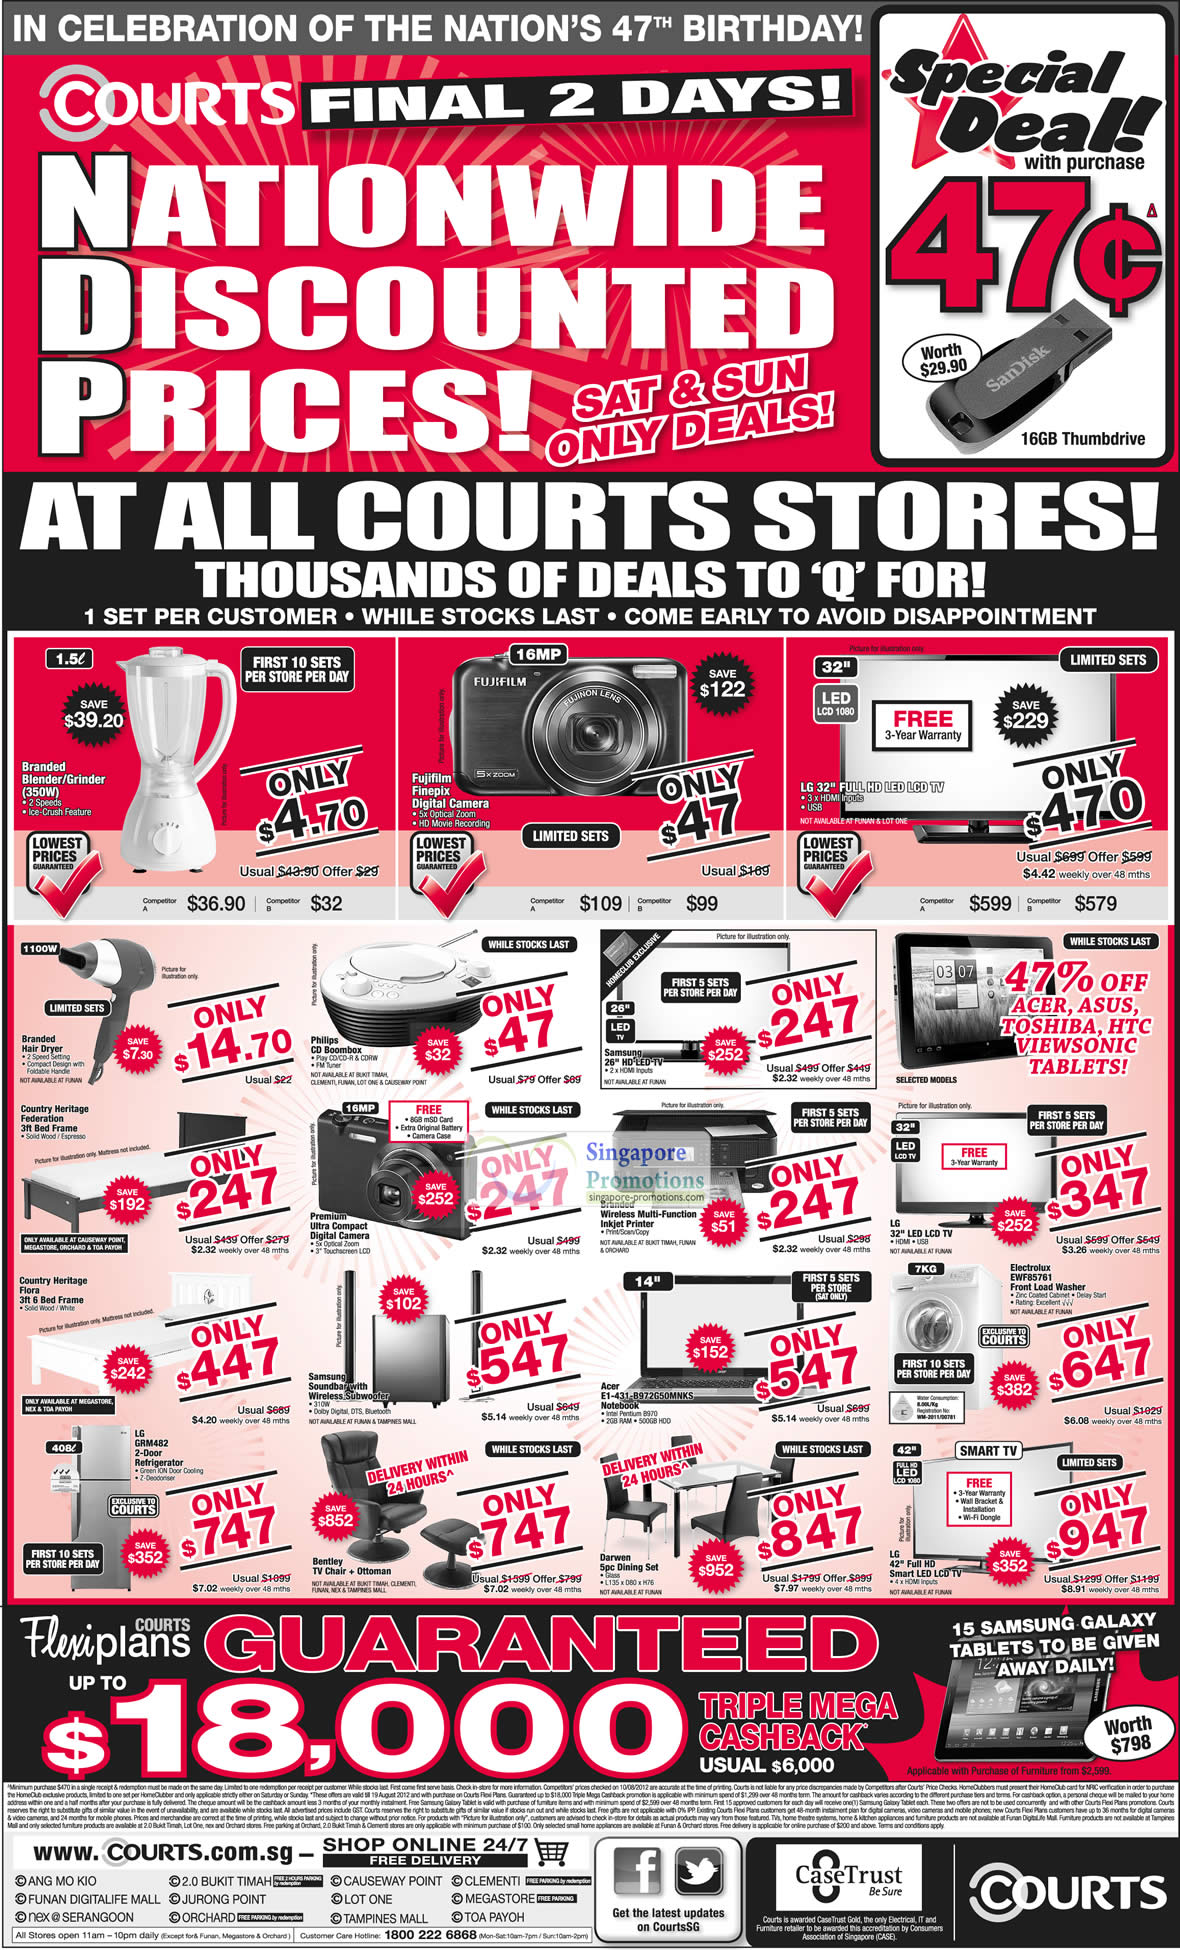 Featured image for Courts Nationwide Discounted Price Offer Promotion 11 - 17 Aug 2012